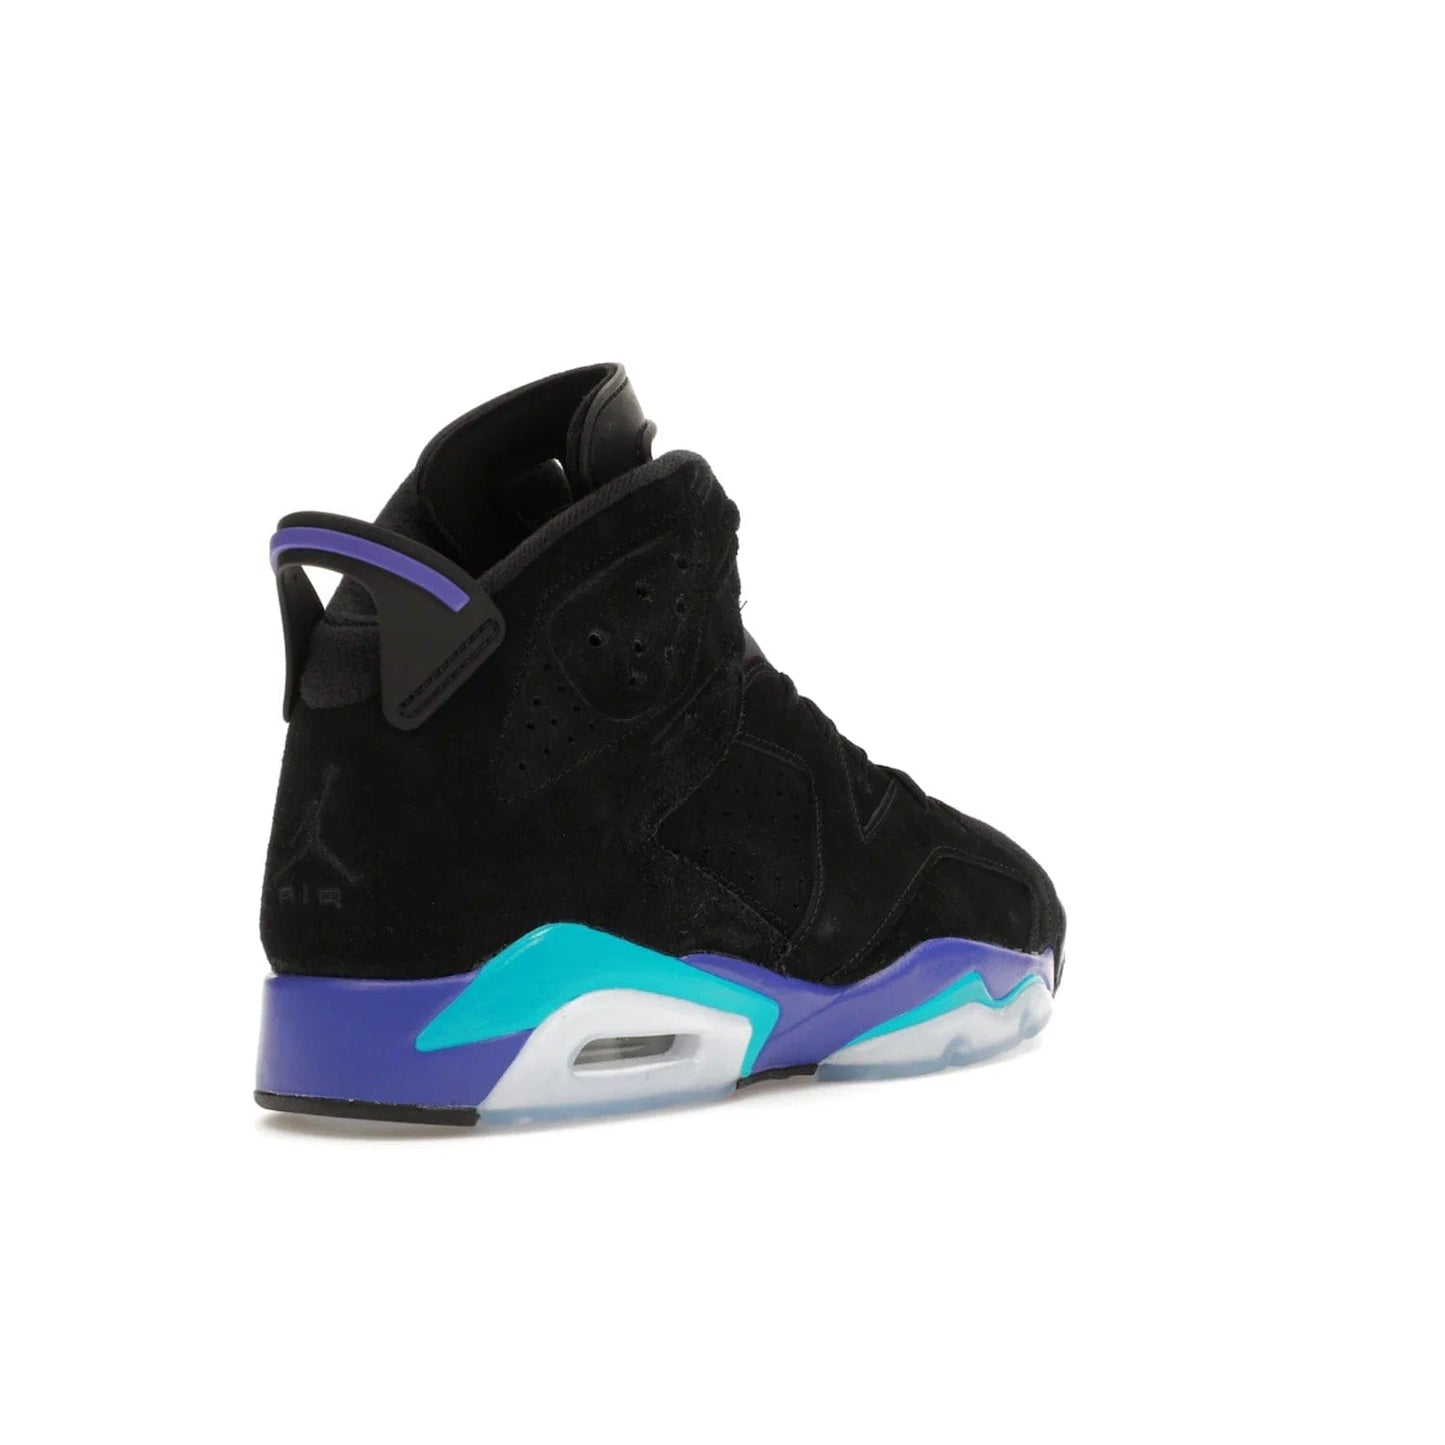 Jordan 6 Retro Aqua - Image 32 - Only at www.BallersClubKickz.com - Feel the classic Jordan 6 Retro Aqua paired with modern style. Black, Bright Concord, and Aquatone hues are crafted with a supple suede and rubberized heel tab. This standout sneaker adds signature Jordan elements at $200. Elevate your style with the Jordan 6 Retro Aqua.